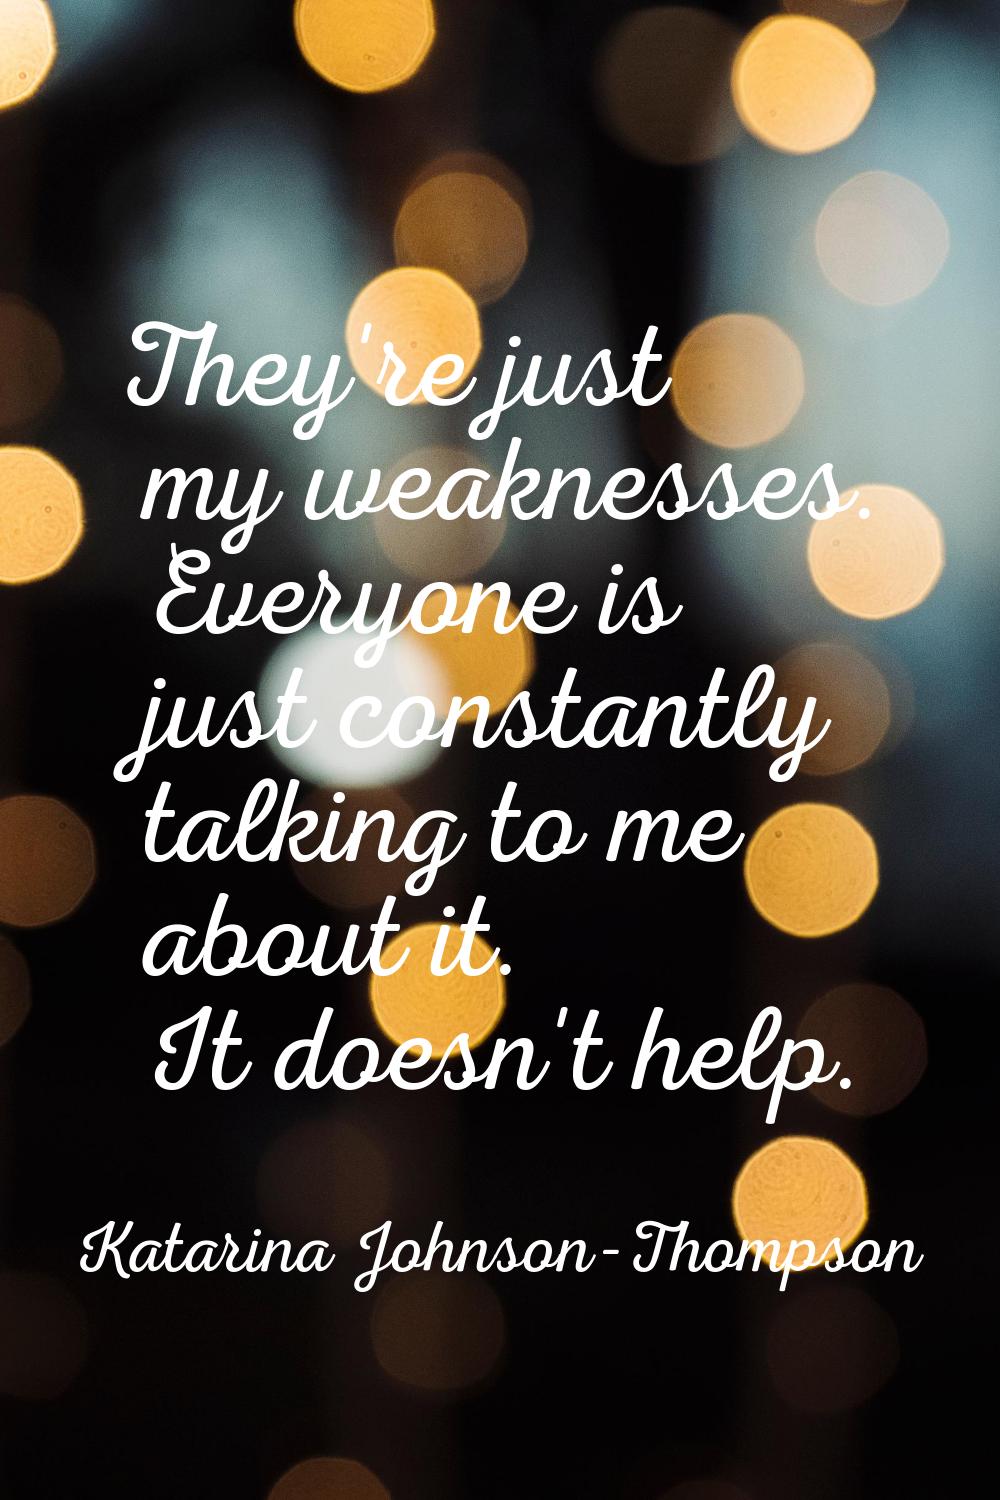 They're just my weaknesses. Everyone is just constantly talking to me about it. It doesn't help.